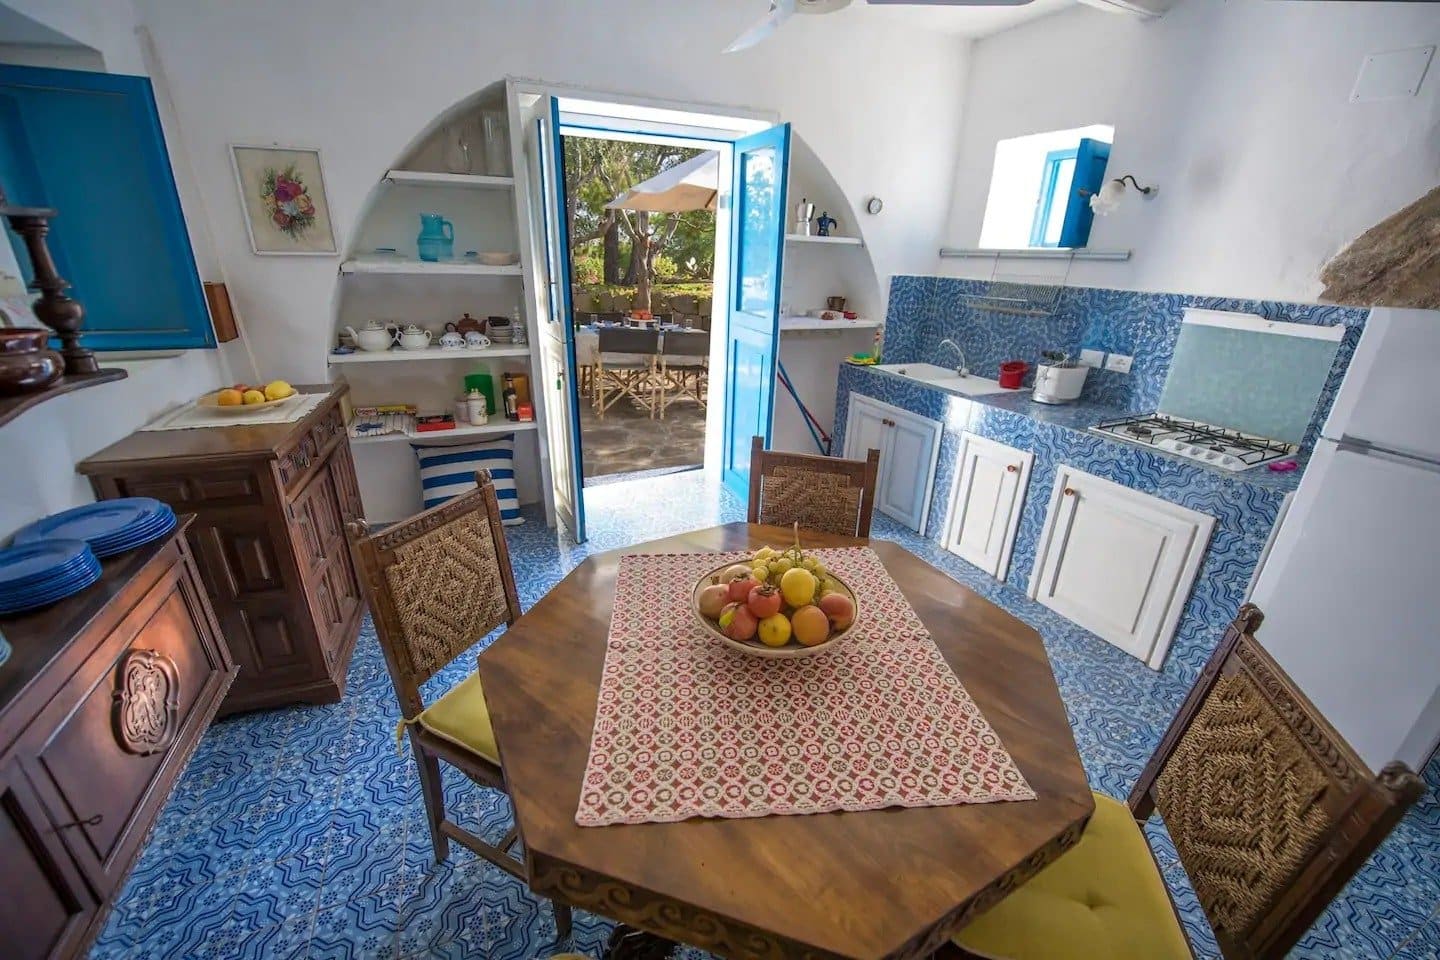 Bellissimo Airbnb nelle isole Eolie